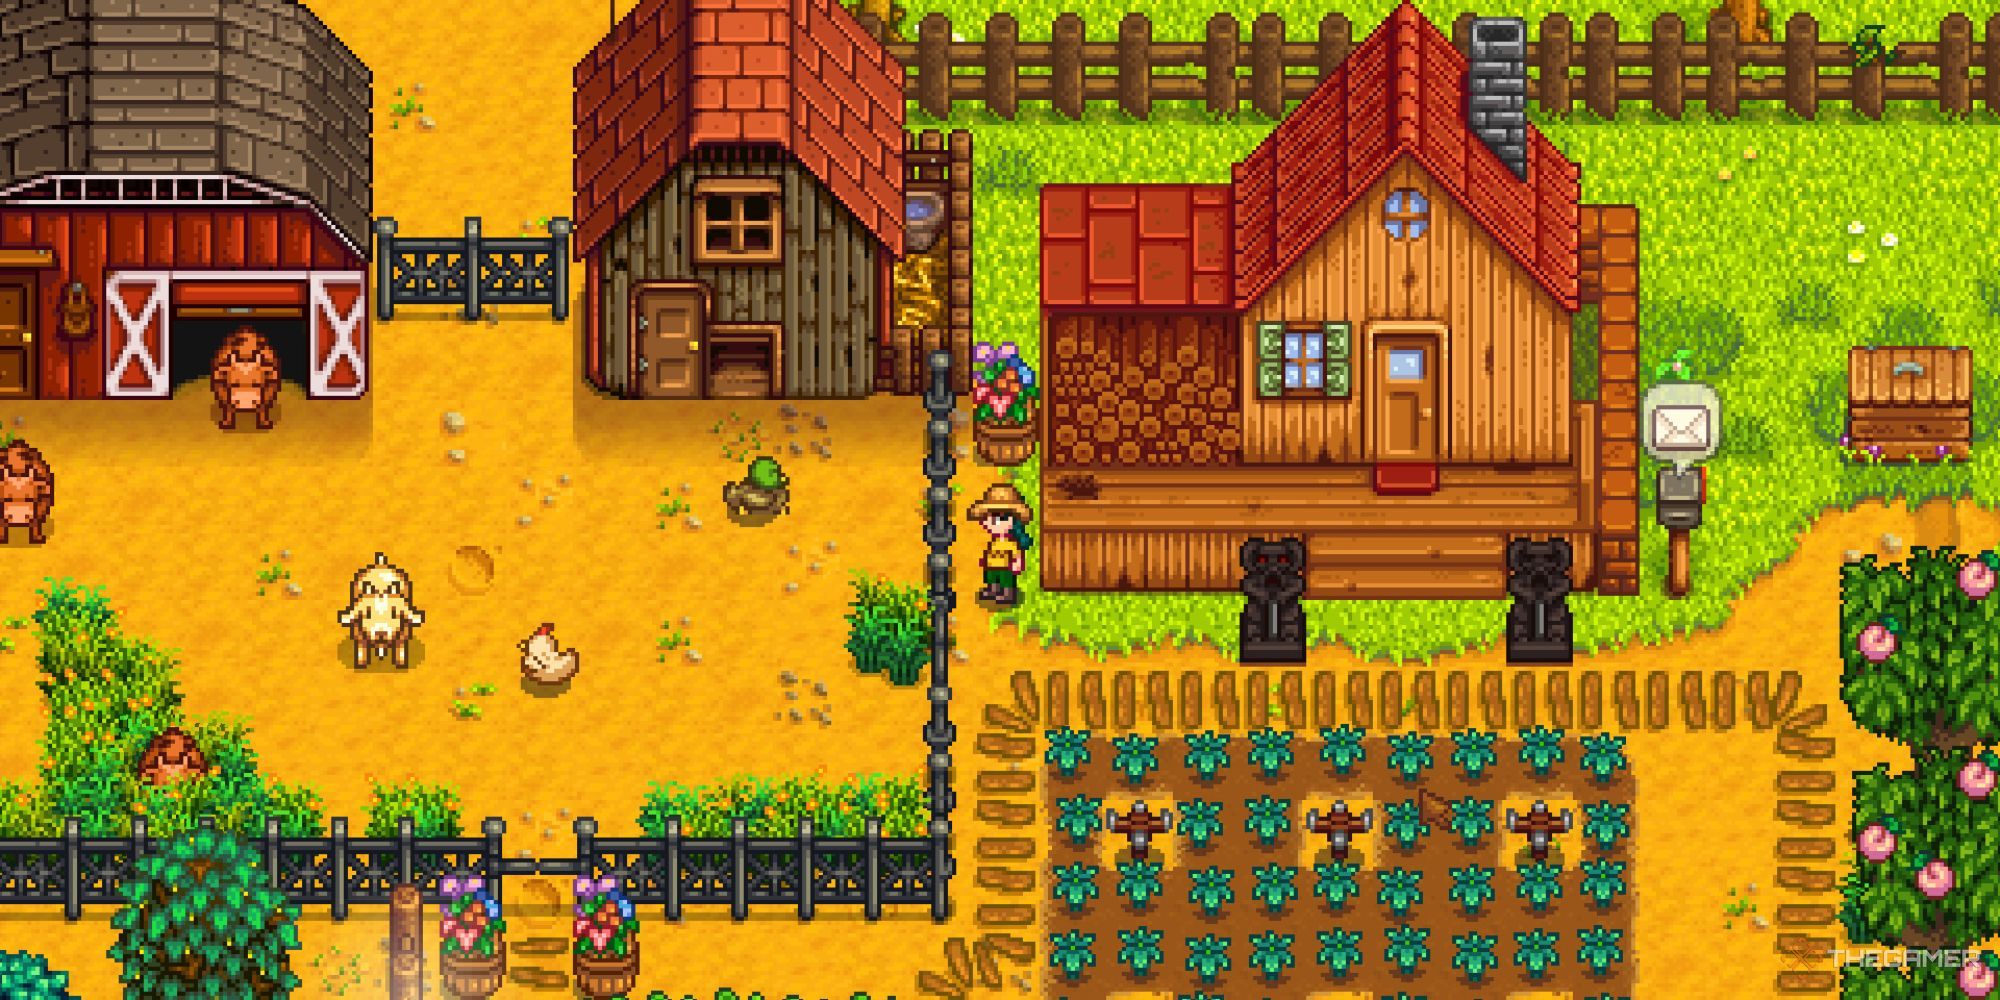 A character stands near a coop in Stardew Valley, observing the animals.